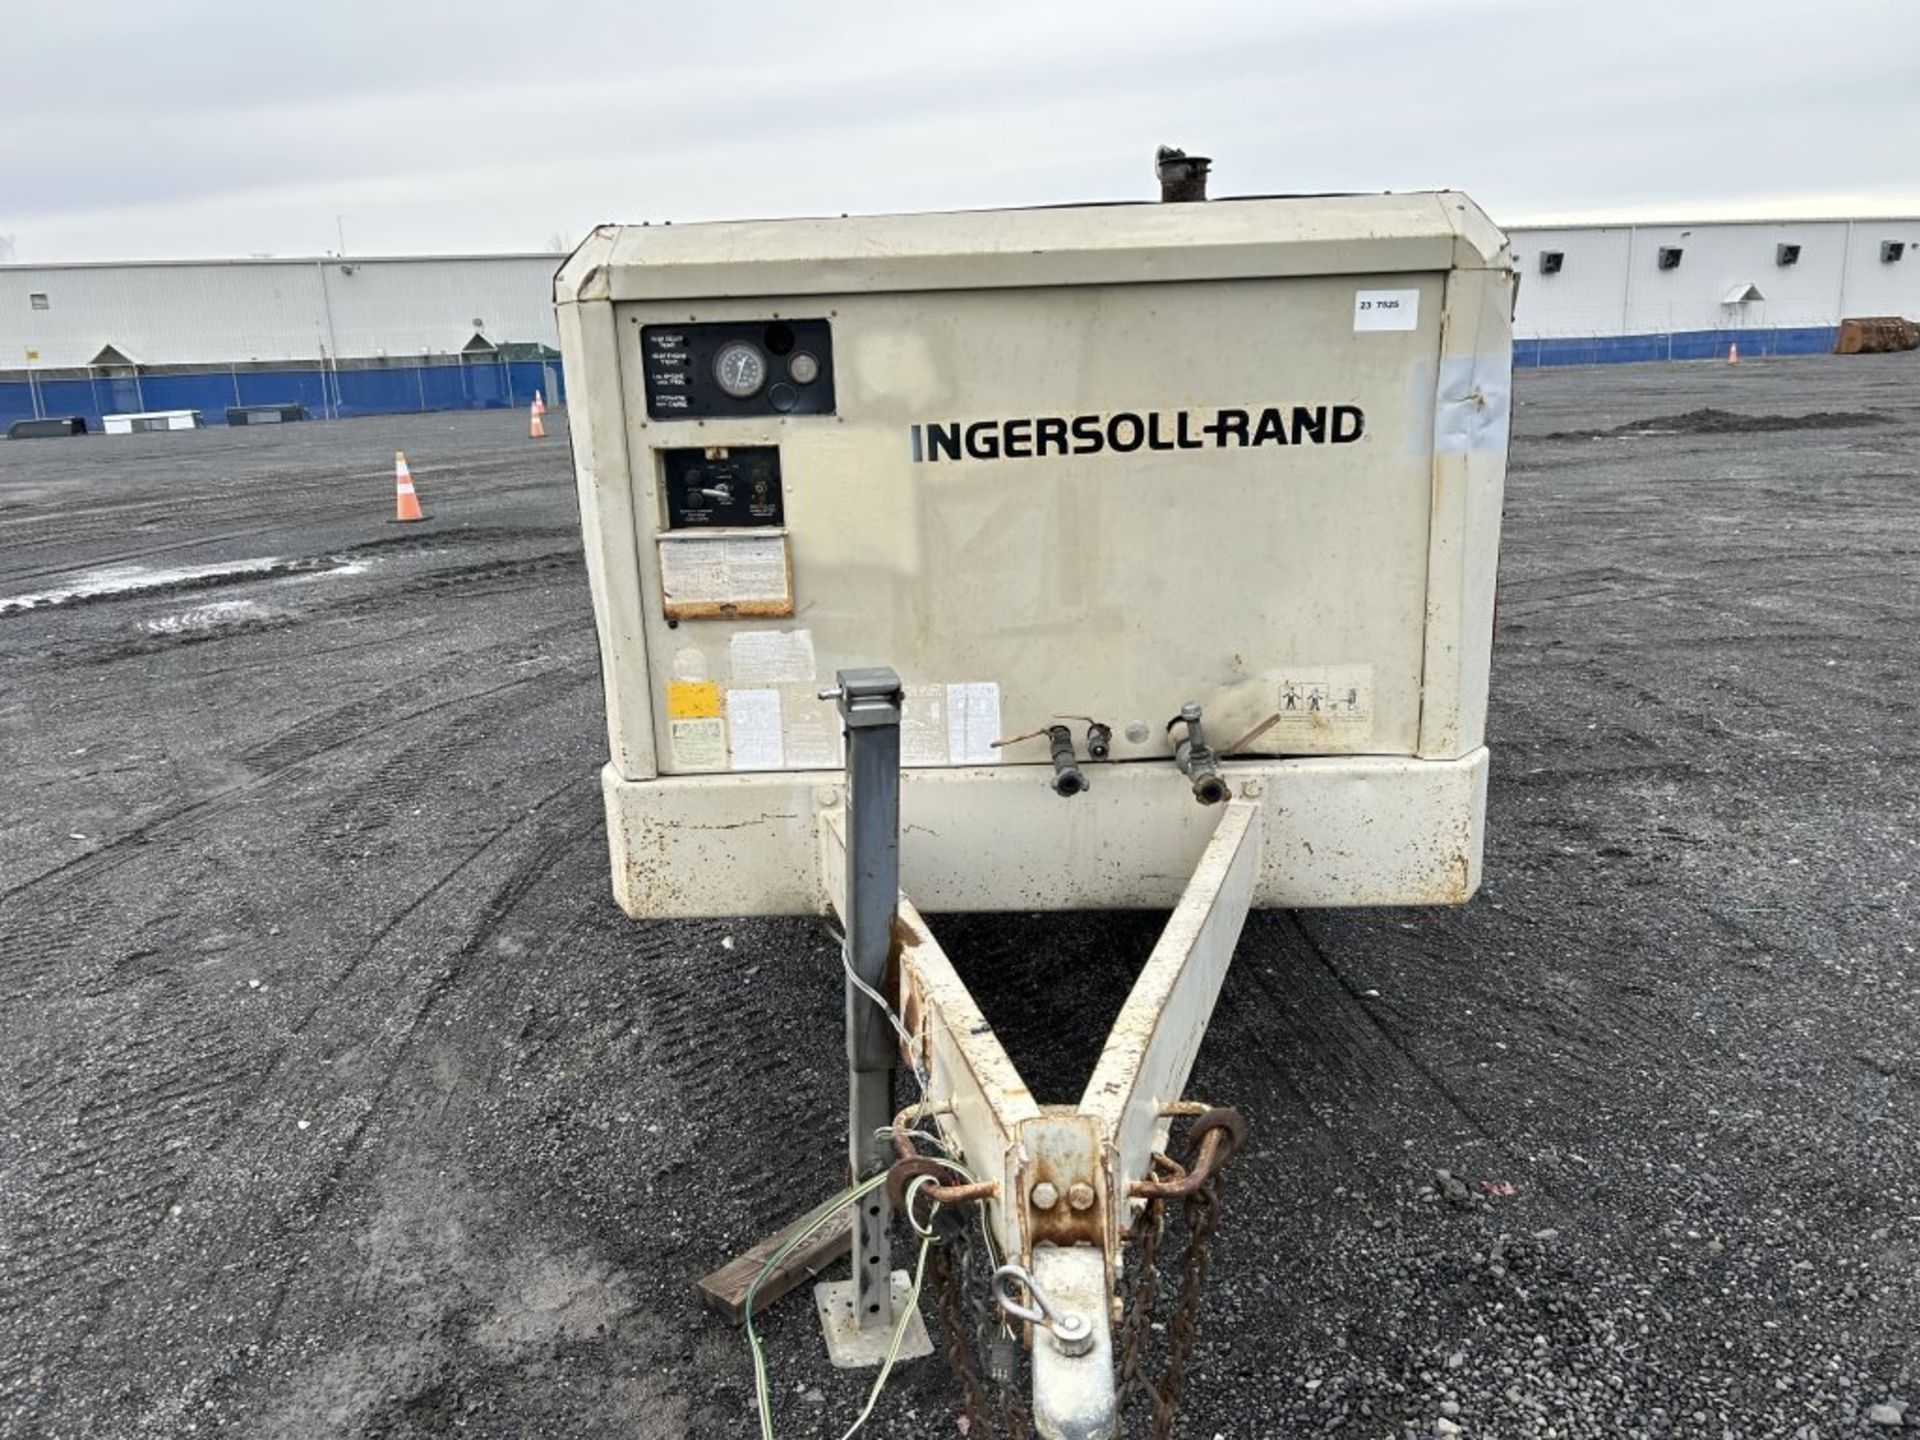 1989 Ingersoll-Rand 375 Towable Air Compressor - Image 8 of 27